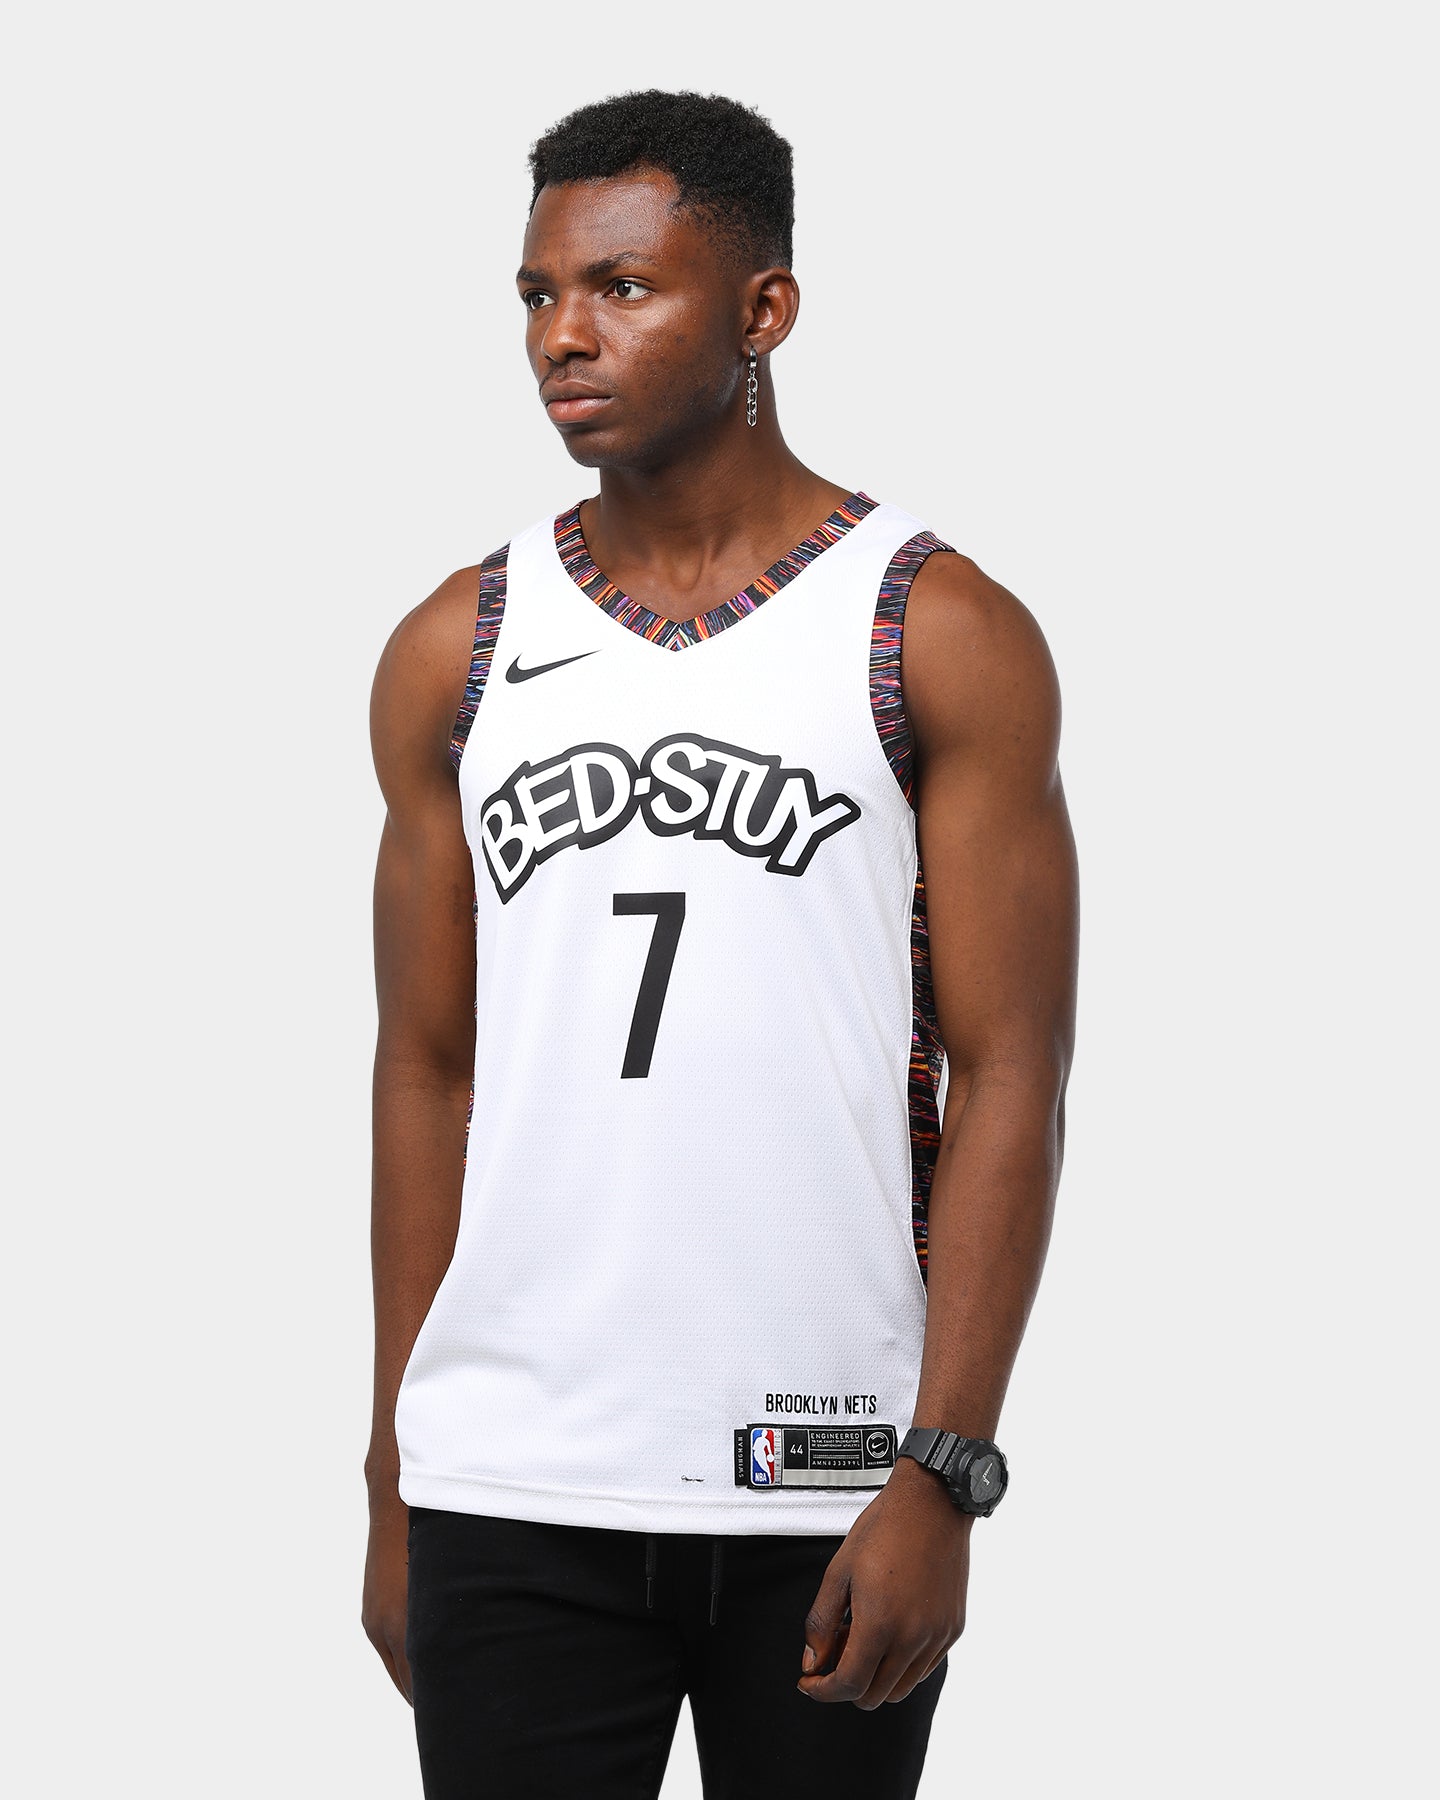 durant city jersey